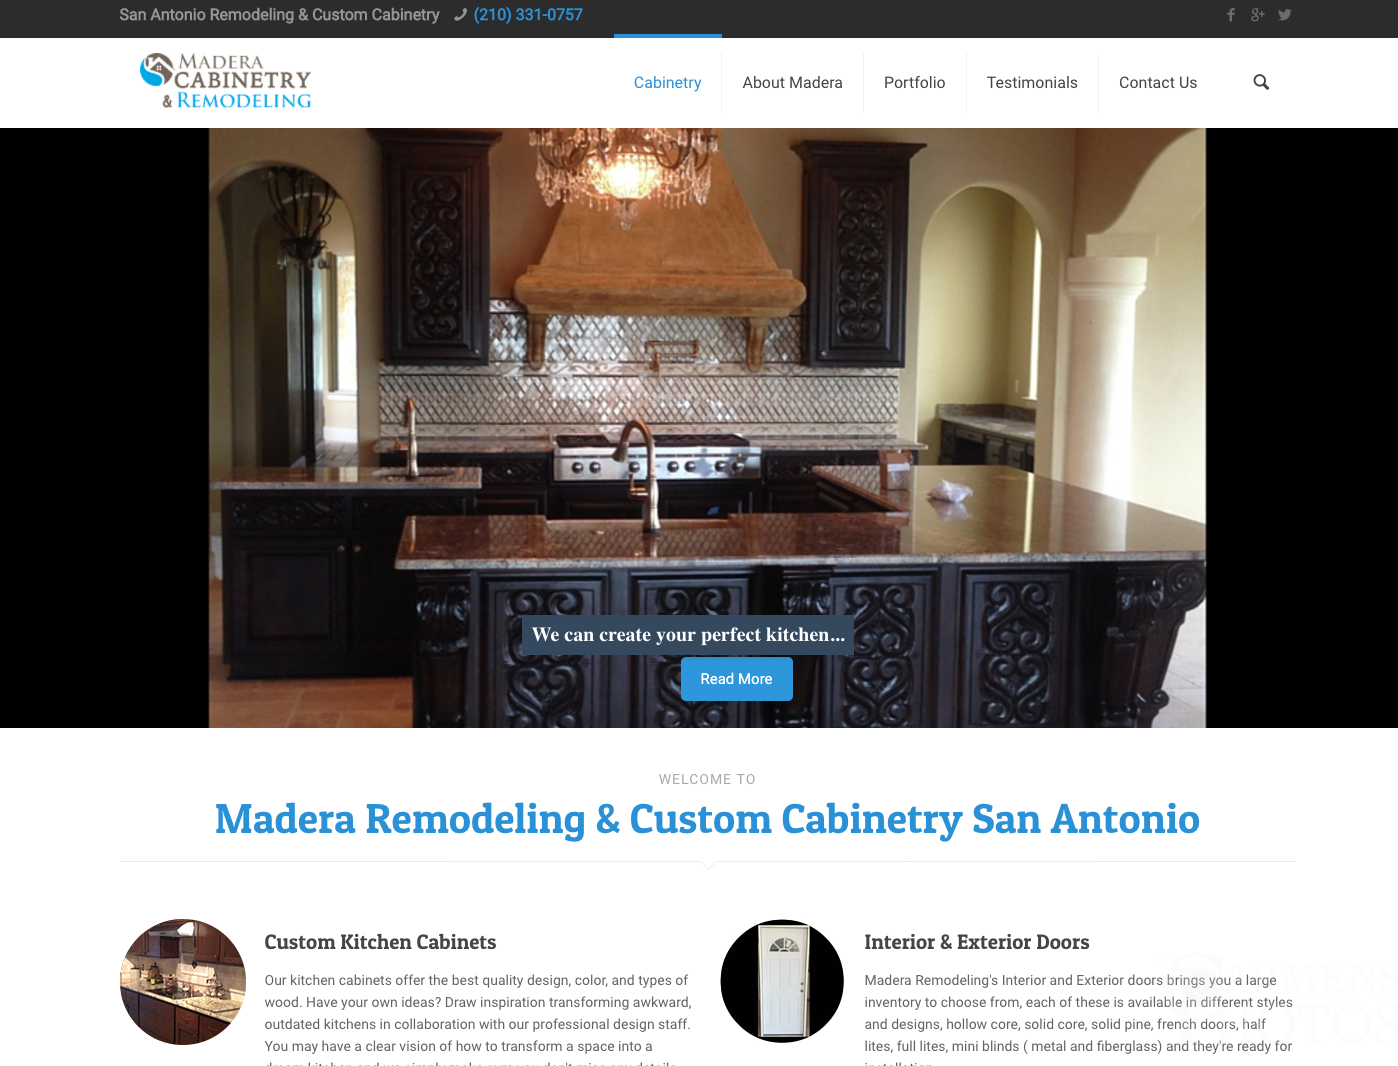 Cabinetry & Remodeling Site